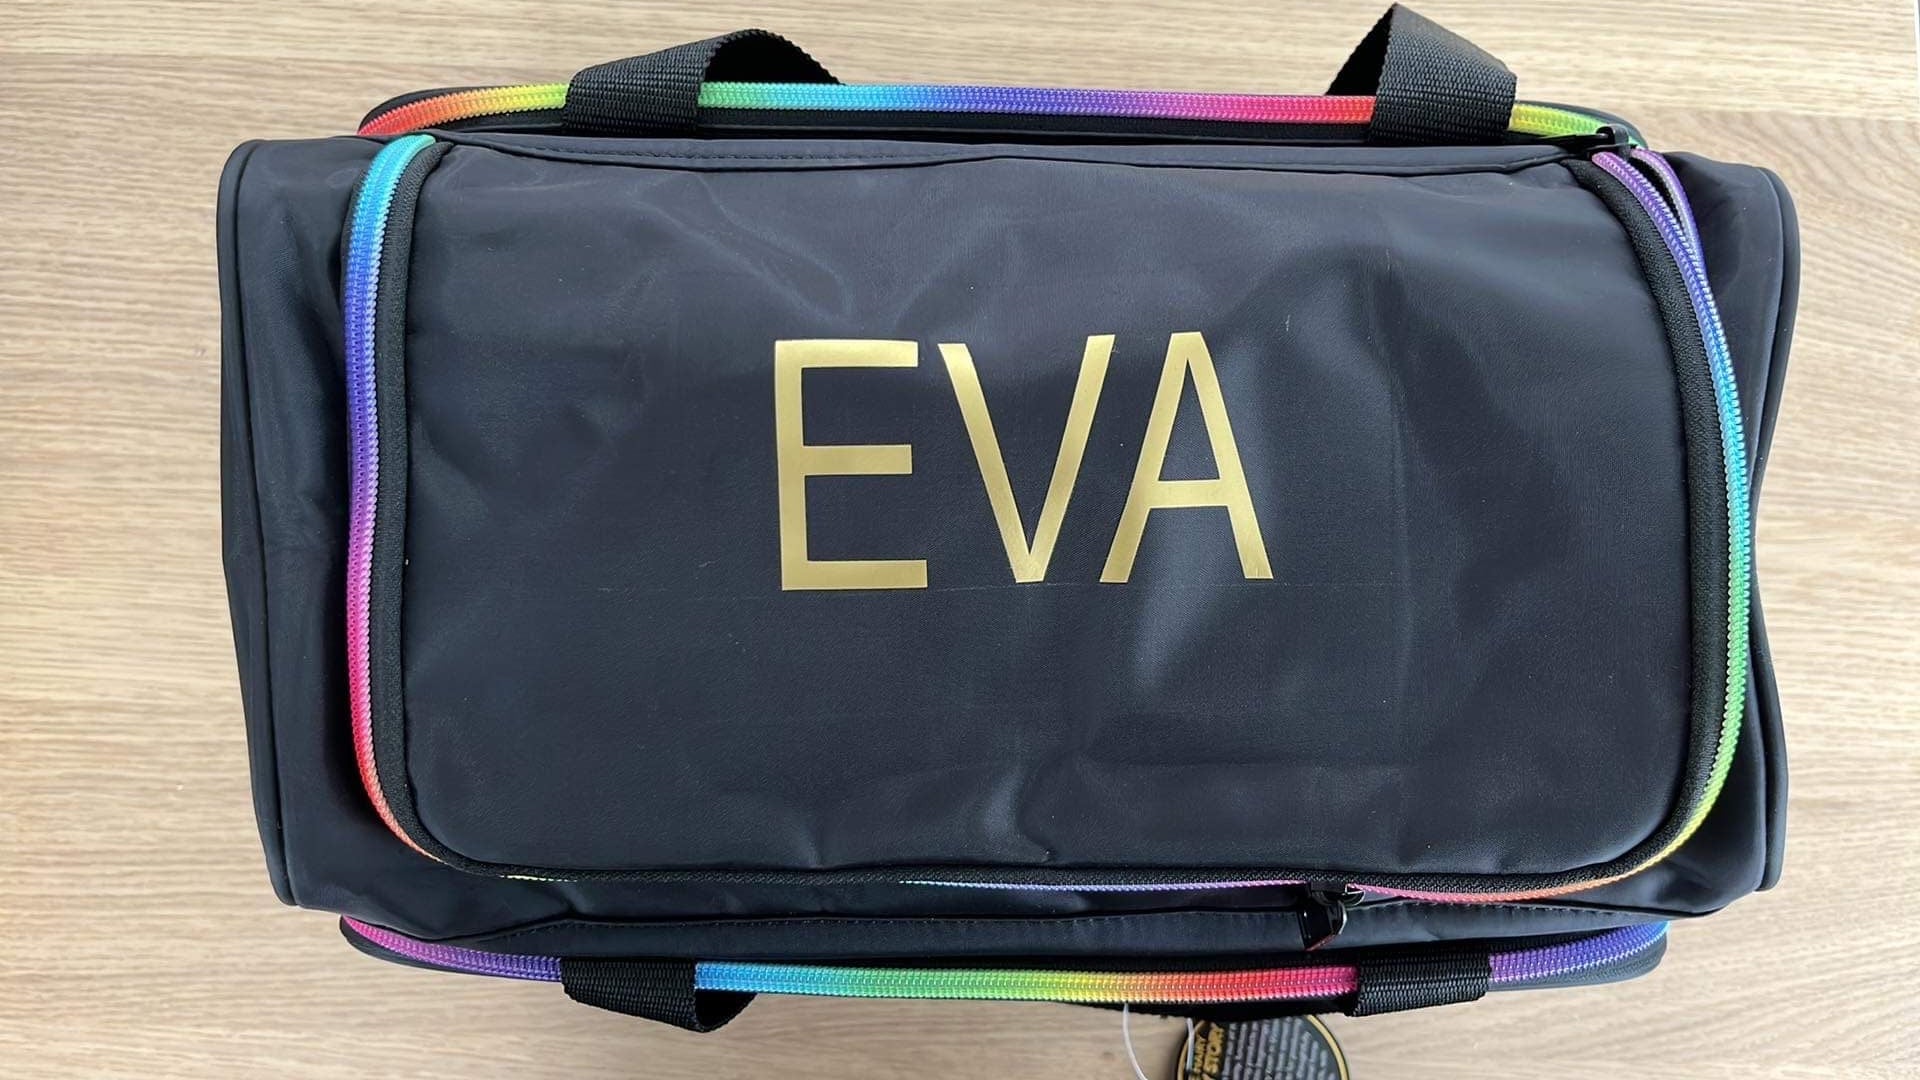 Personalised text on the bag saying "Eva"